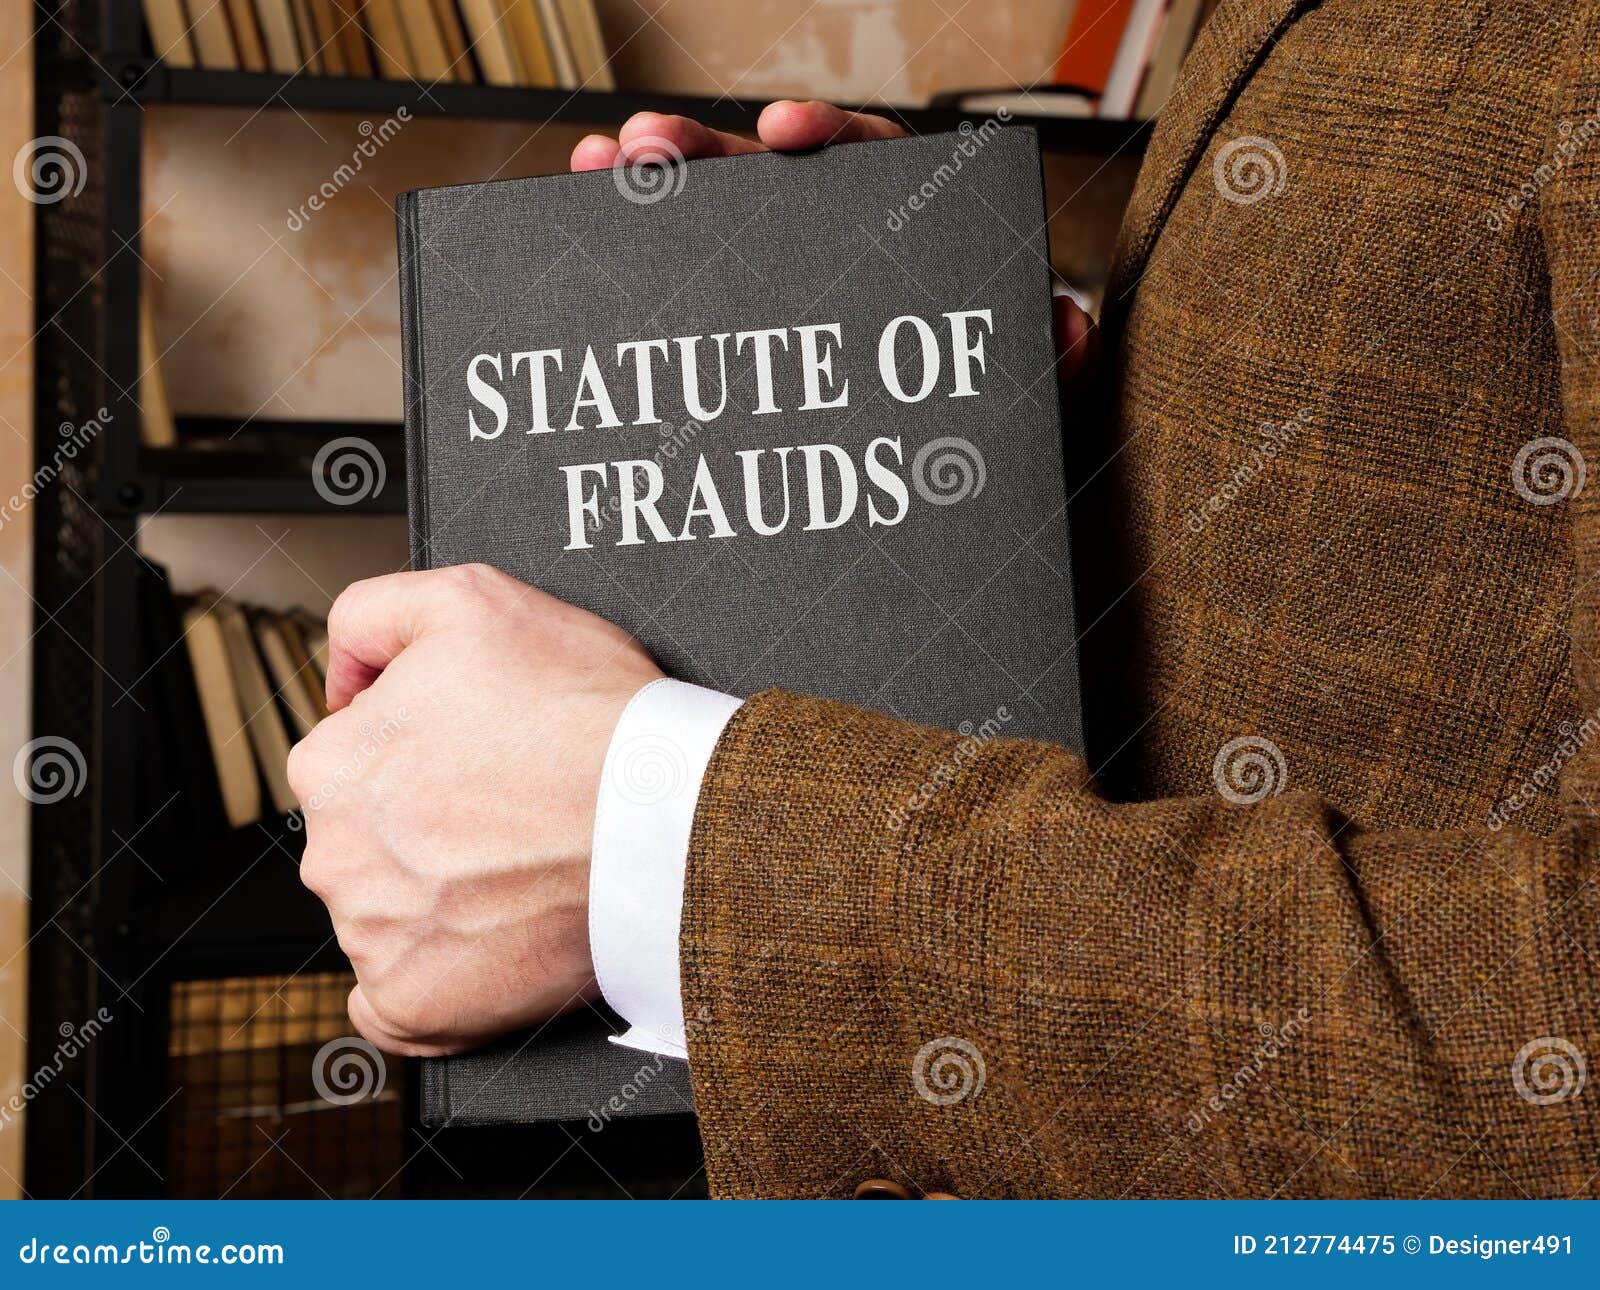 lawyer takes a statute of frauds book from the shelf.